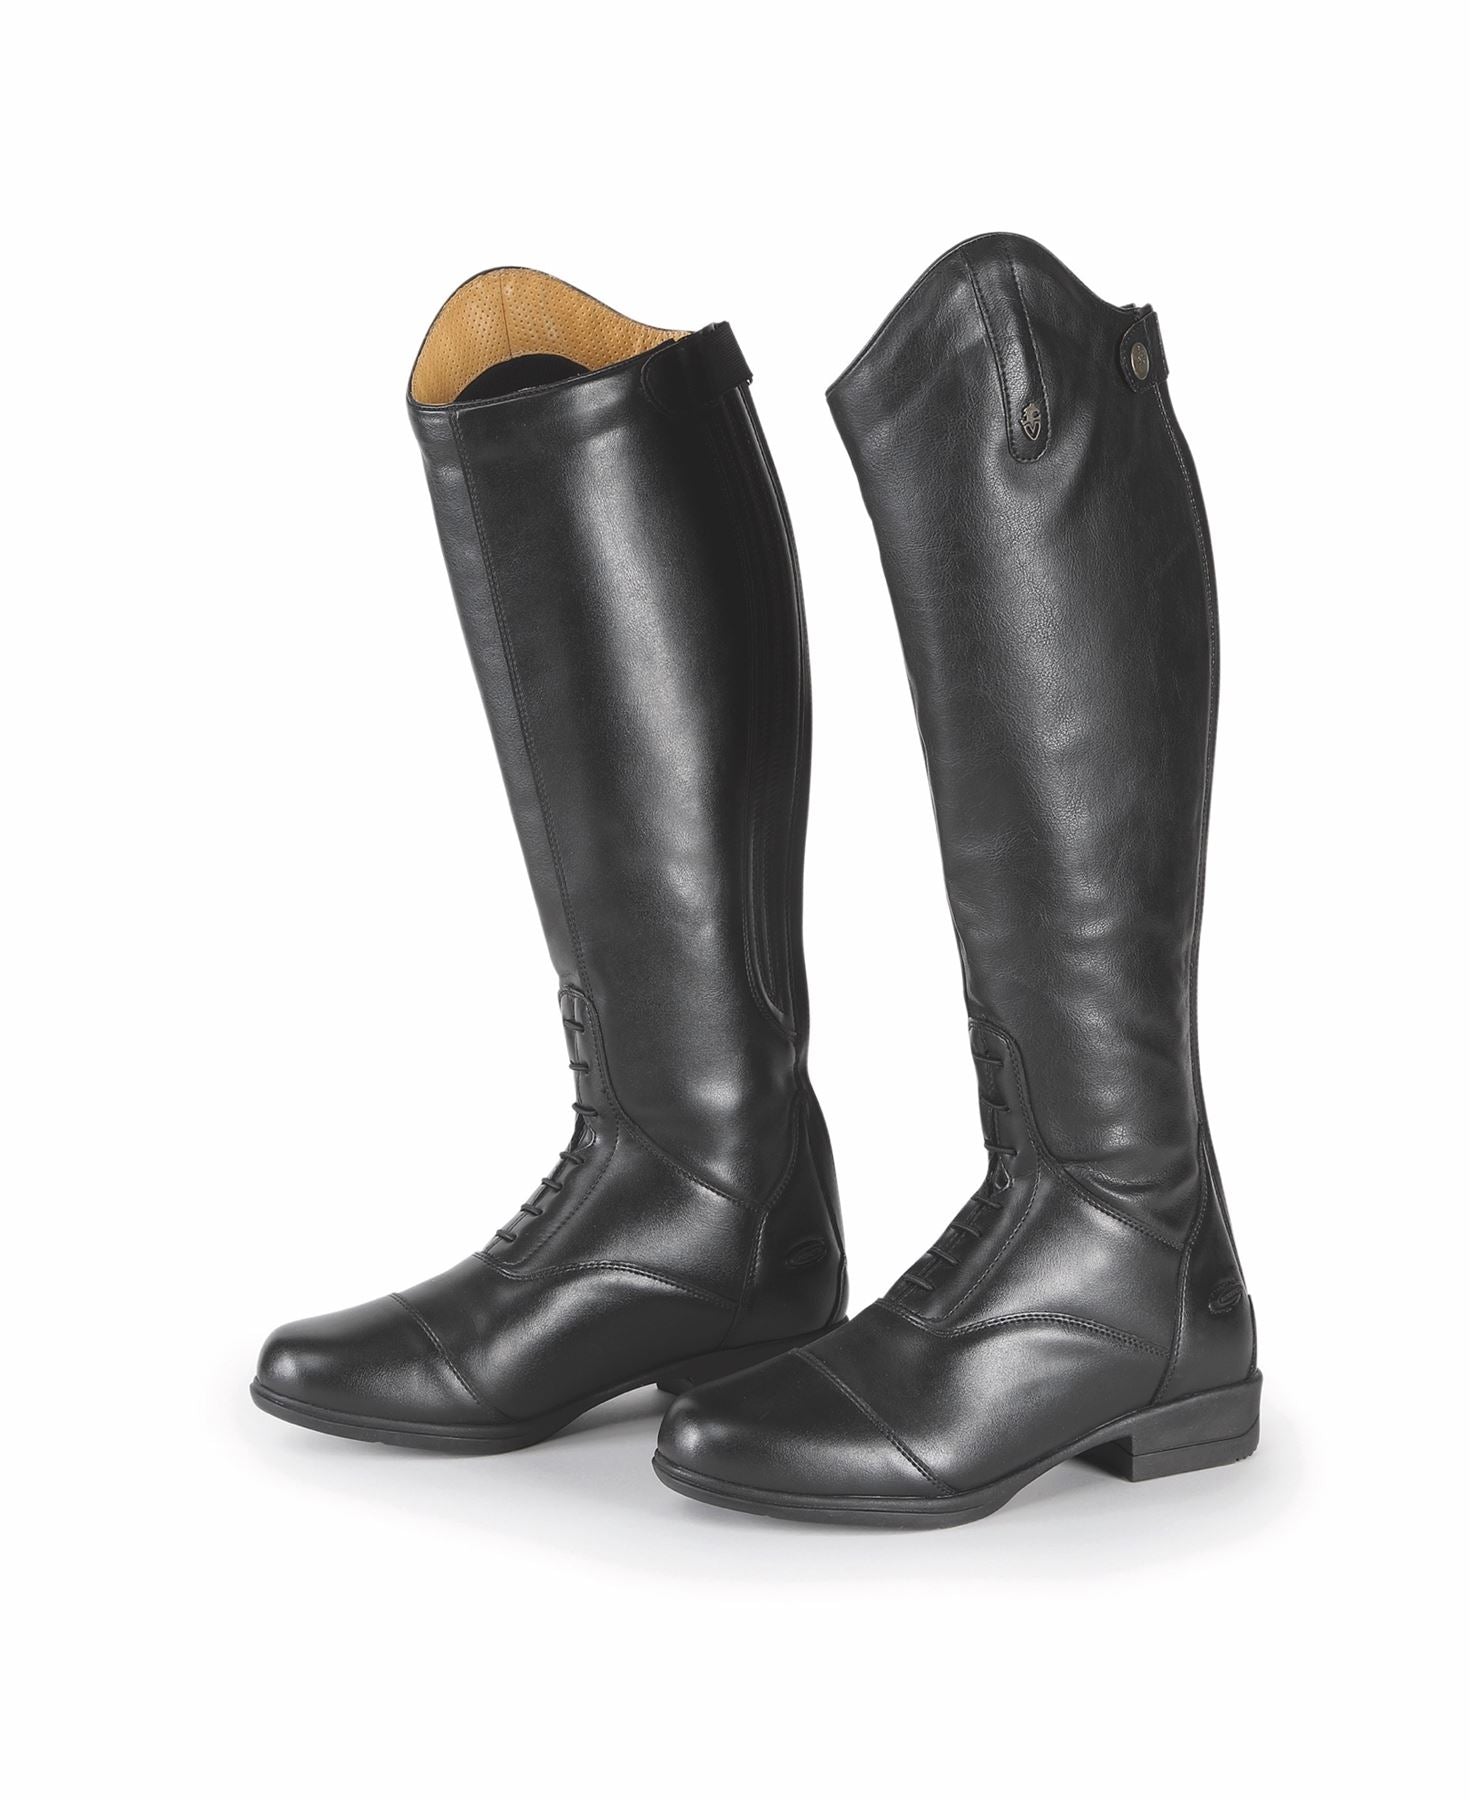 Shires Moretta Luisa Riding Boots - Just Horse Riders